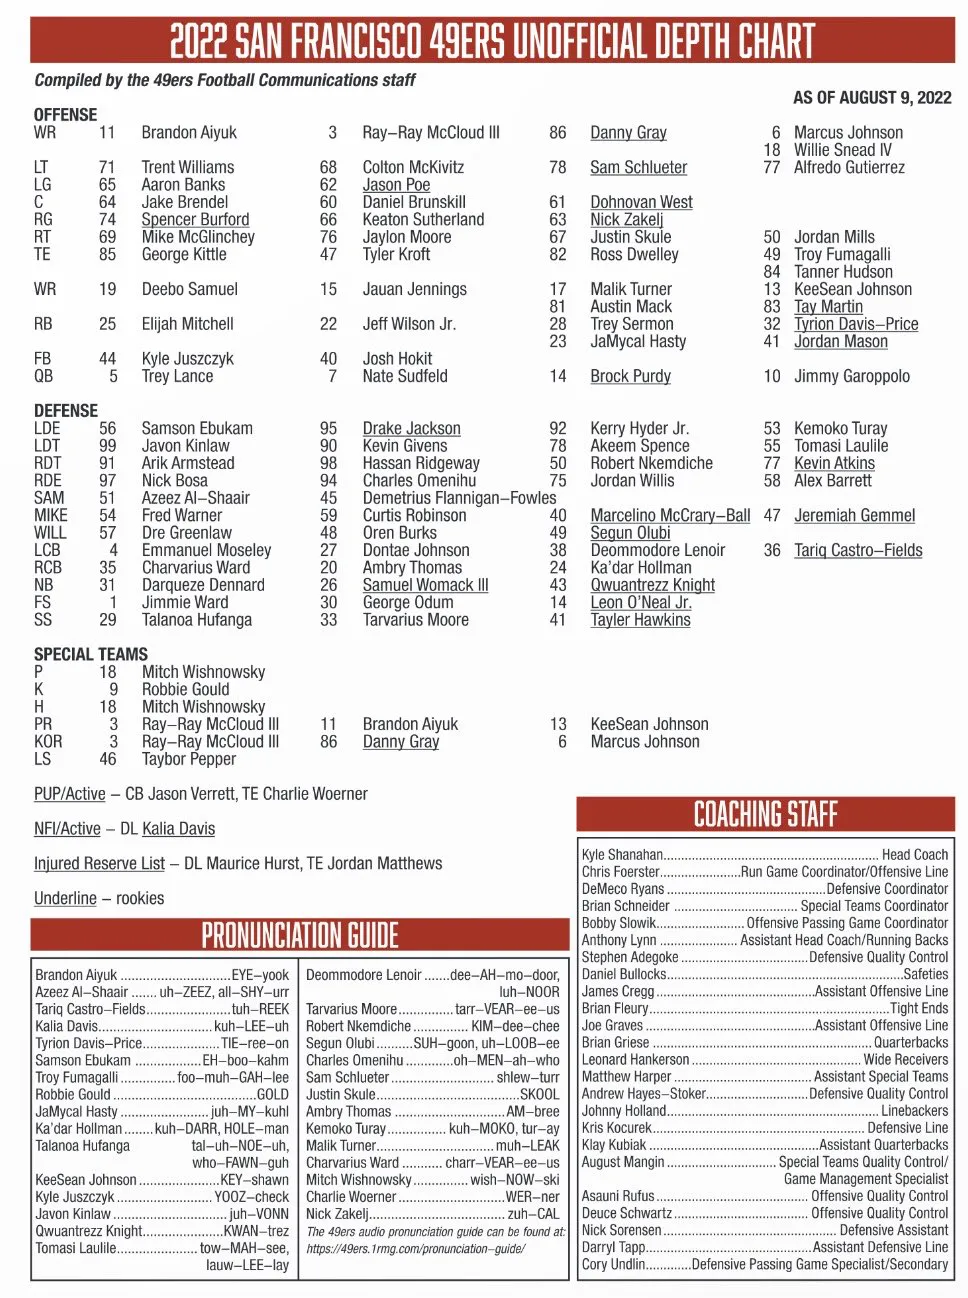 49ers release first unofficial depth chart